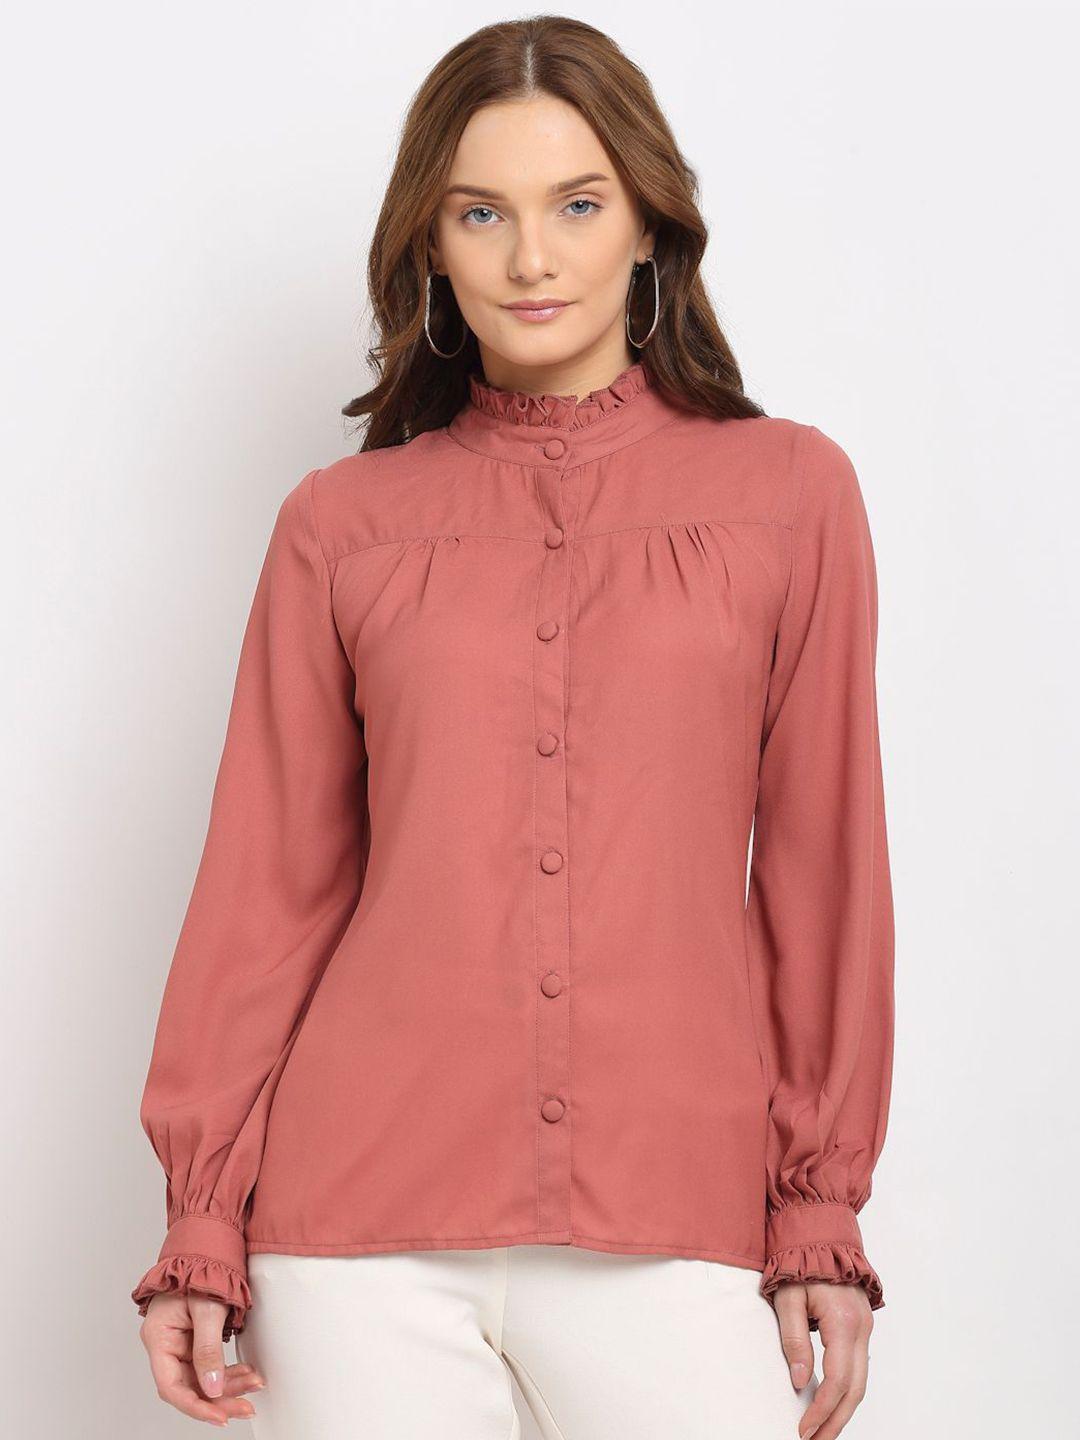 la-zoire--women-pink-frilled-band-collar-top